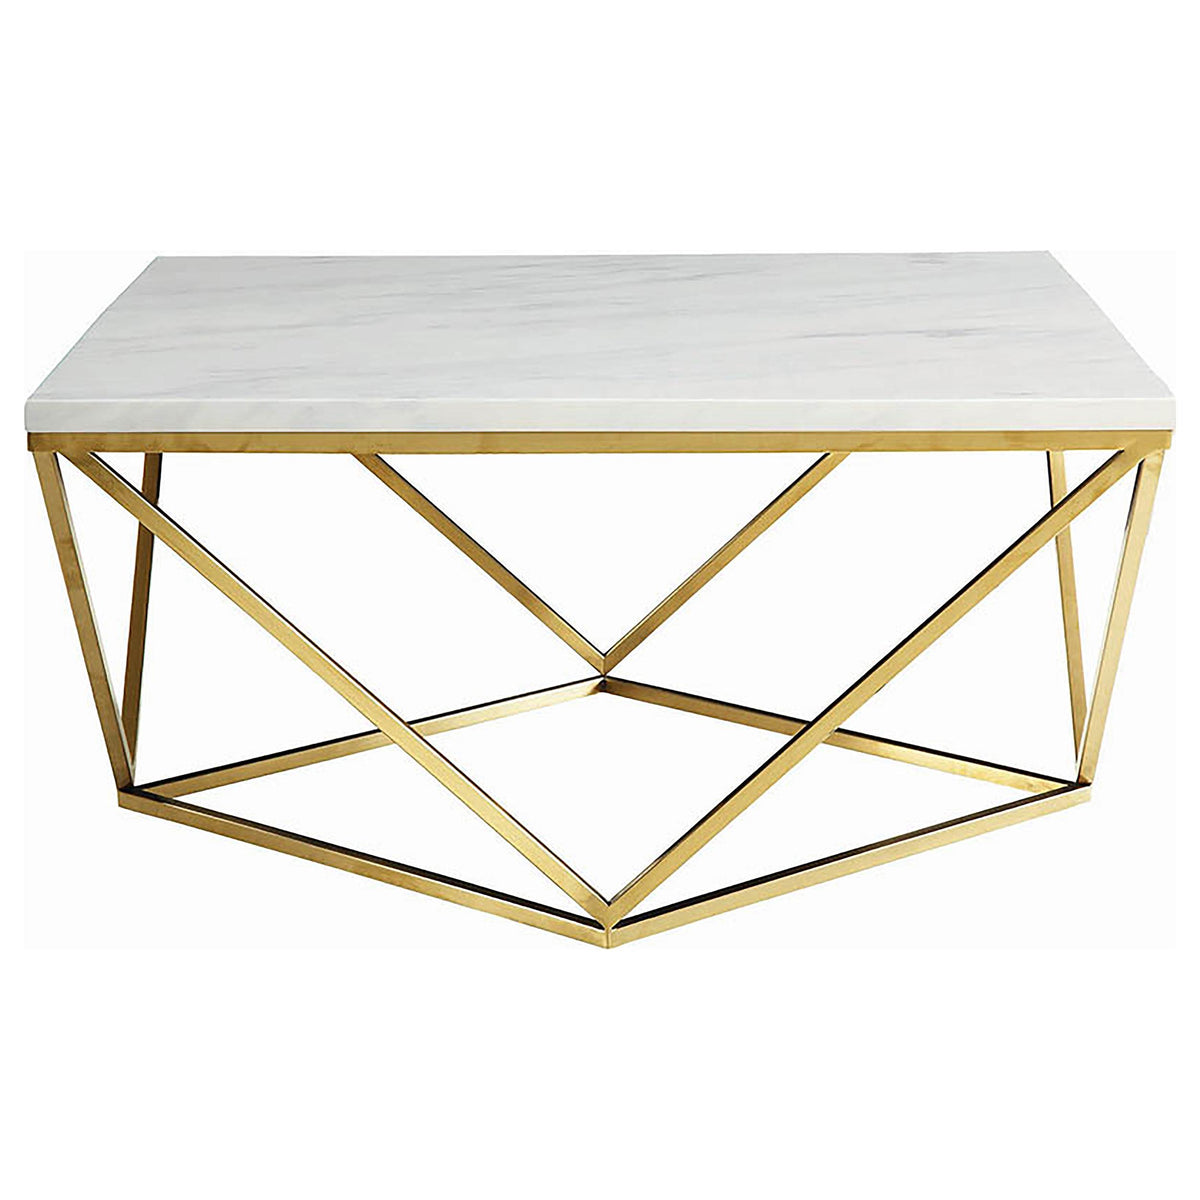 Meryl Square Coffee Table White and Gold Meryl Square Coffee Table White and Gold Half Price Furniture